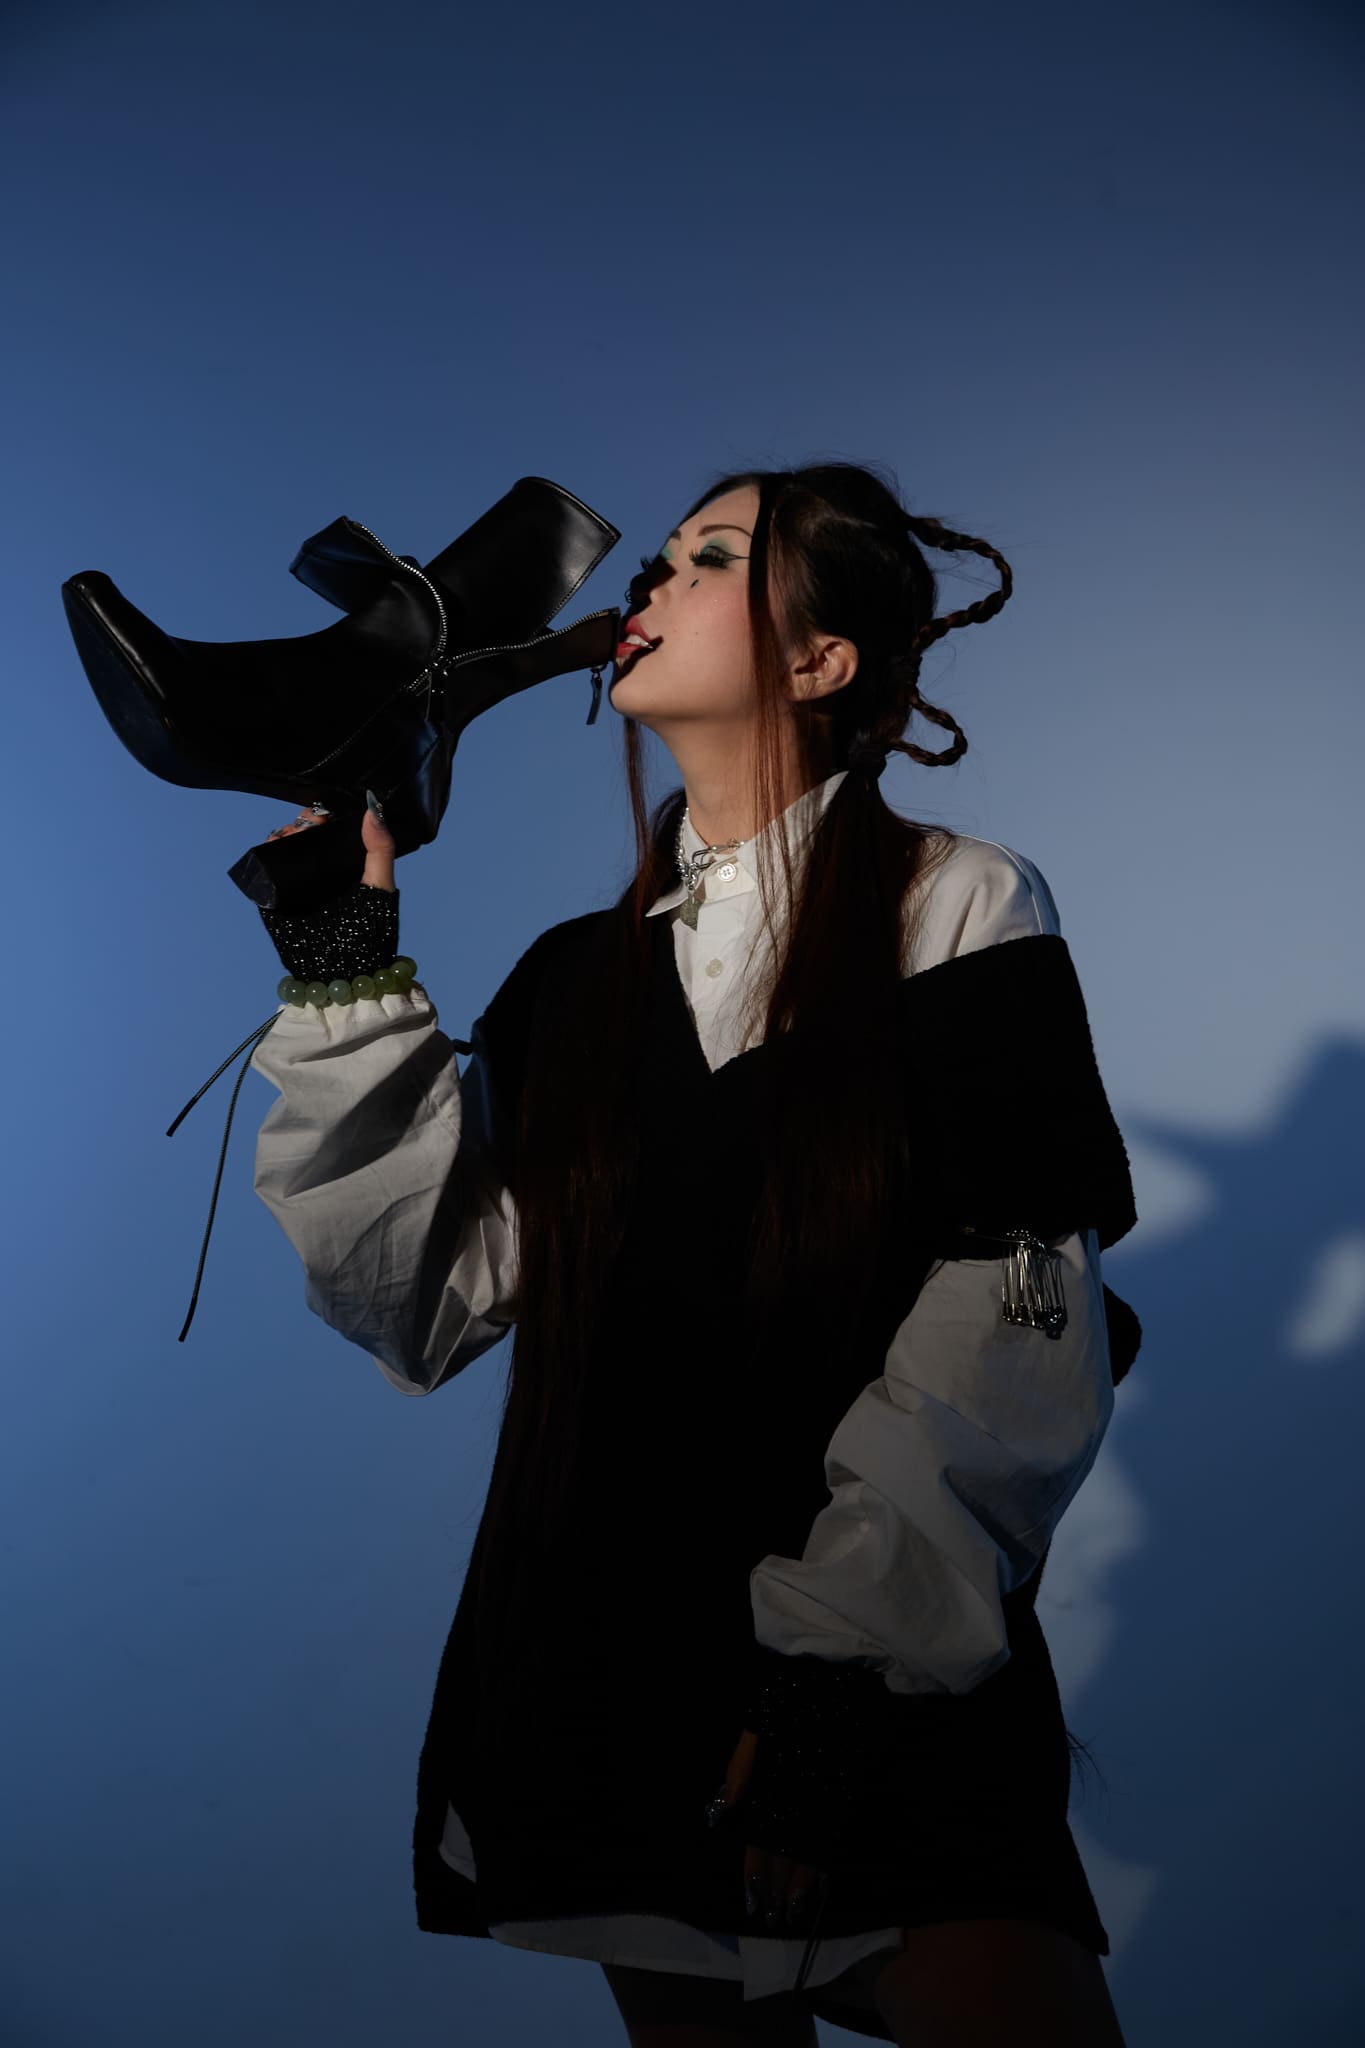 Nikki Park. Photo of a model on a blue background holding a black leather Ankle Boot with Double Tongue. They are wearing an oversized white shirt with black vest.